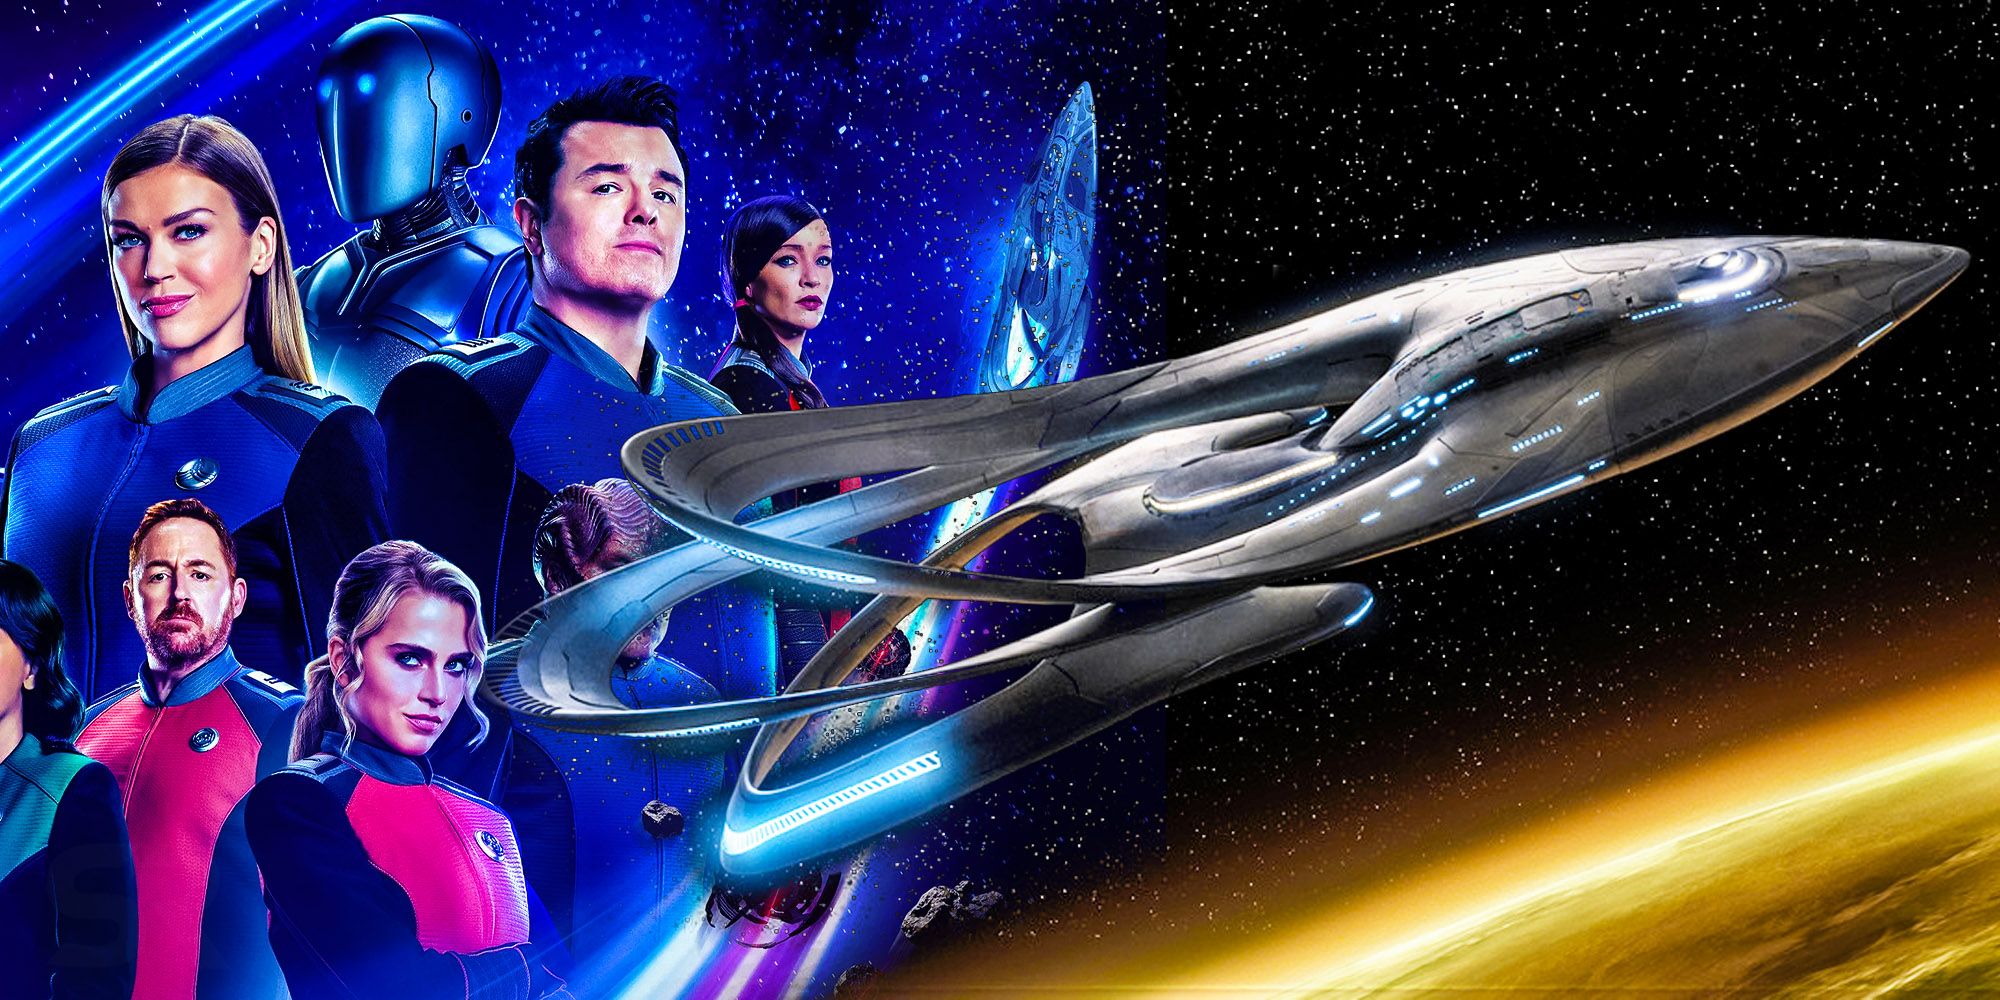 The orville season 4 Cast and ship